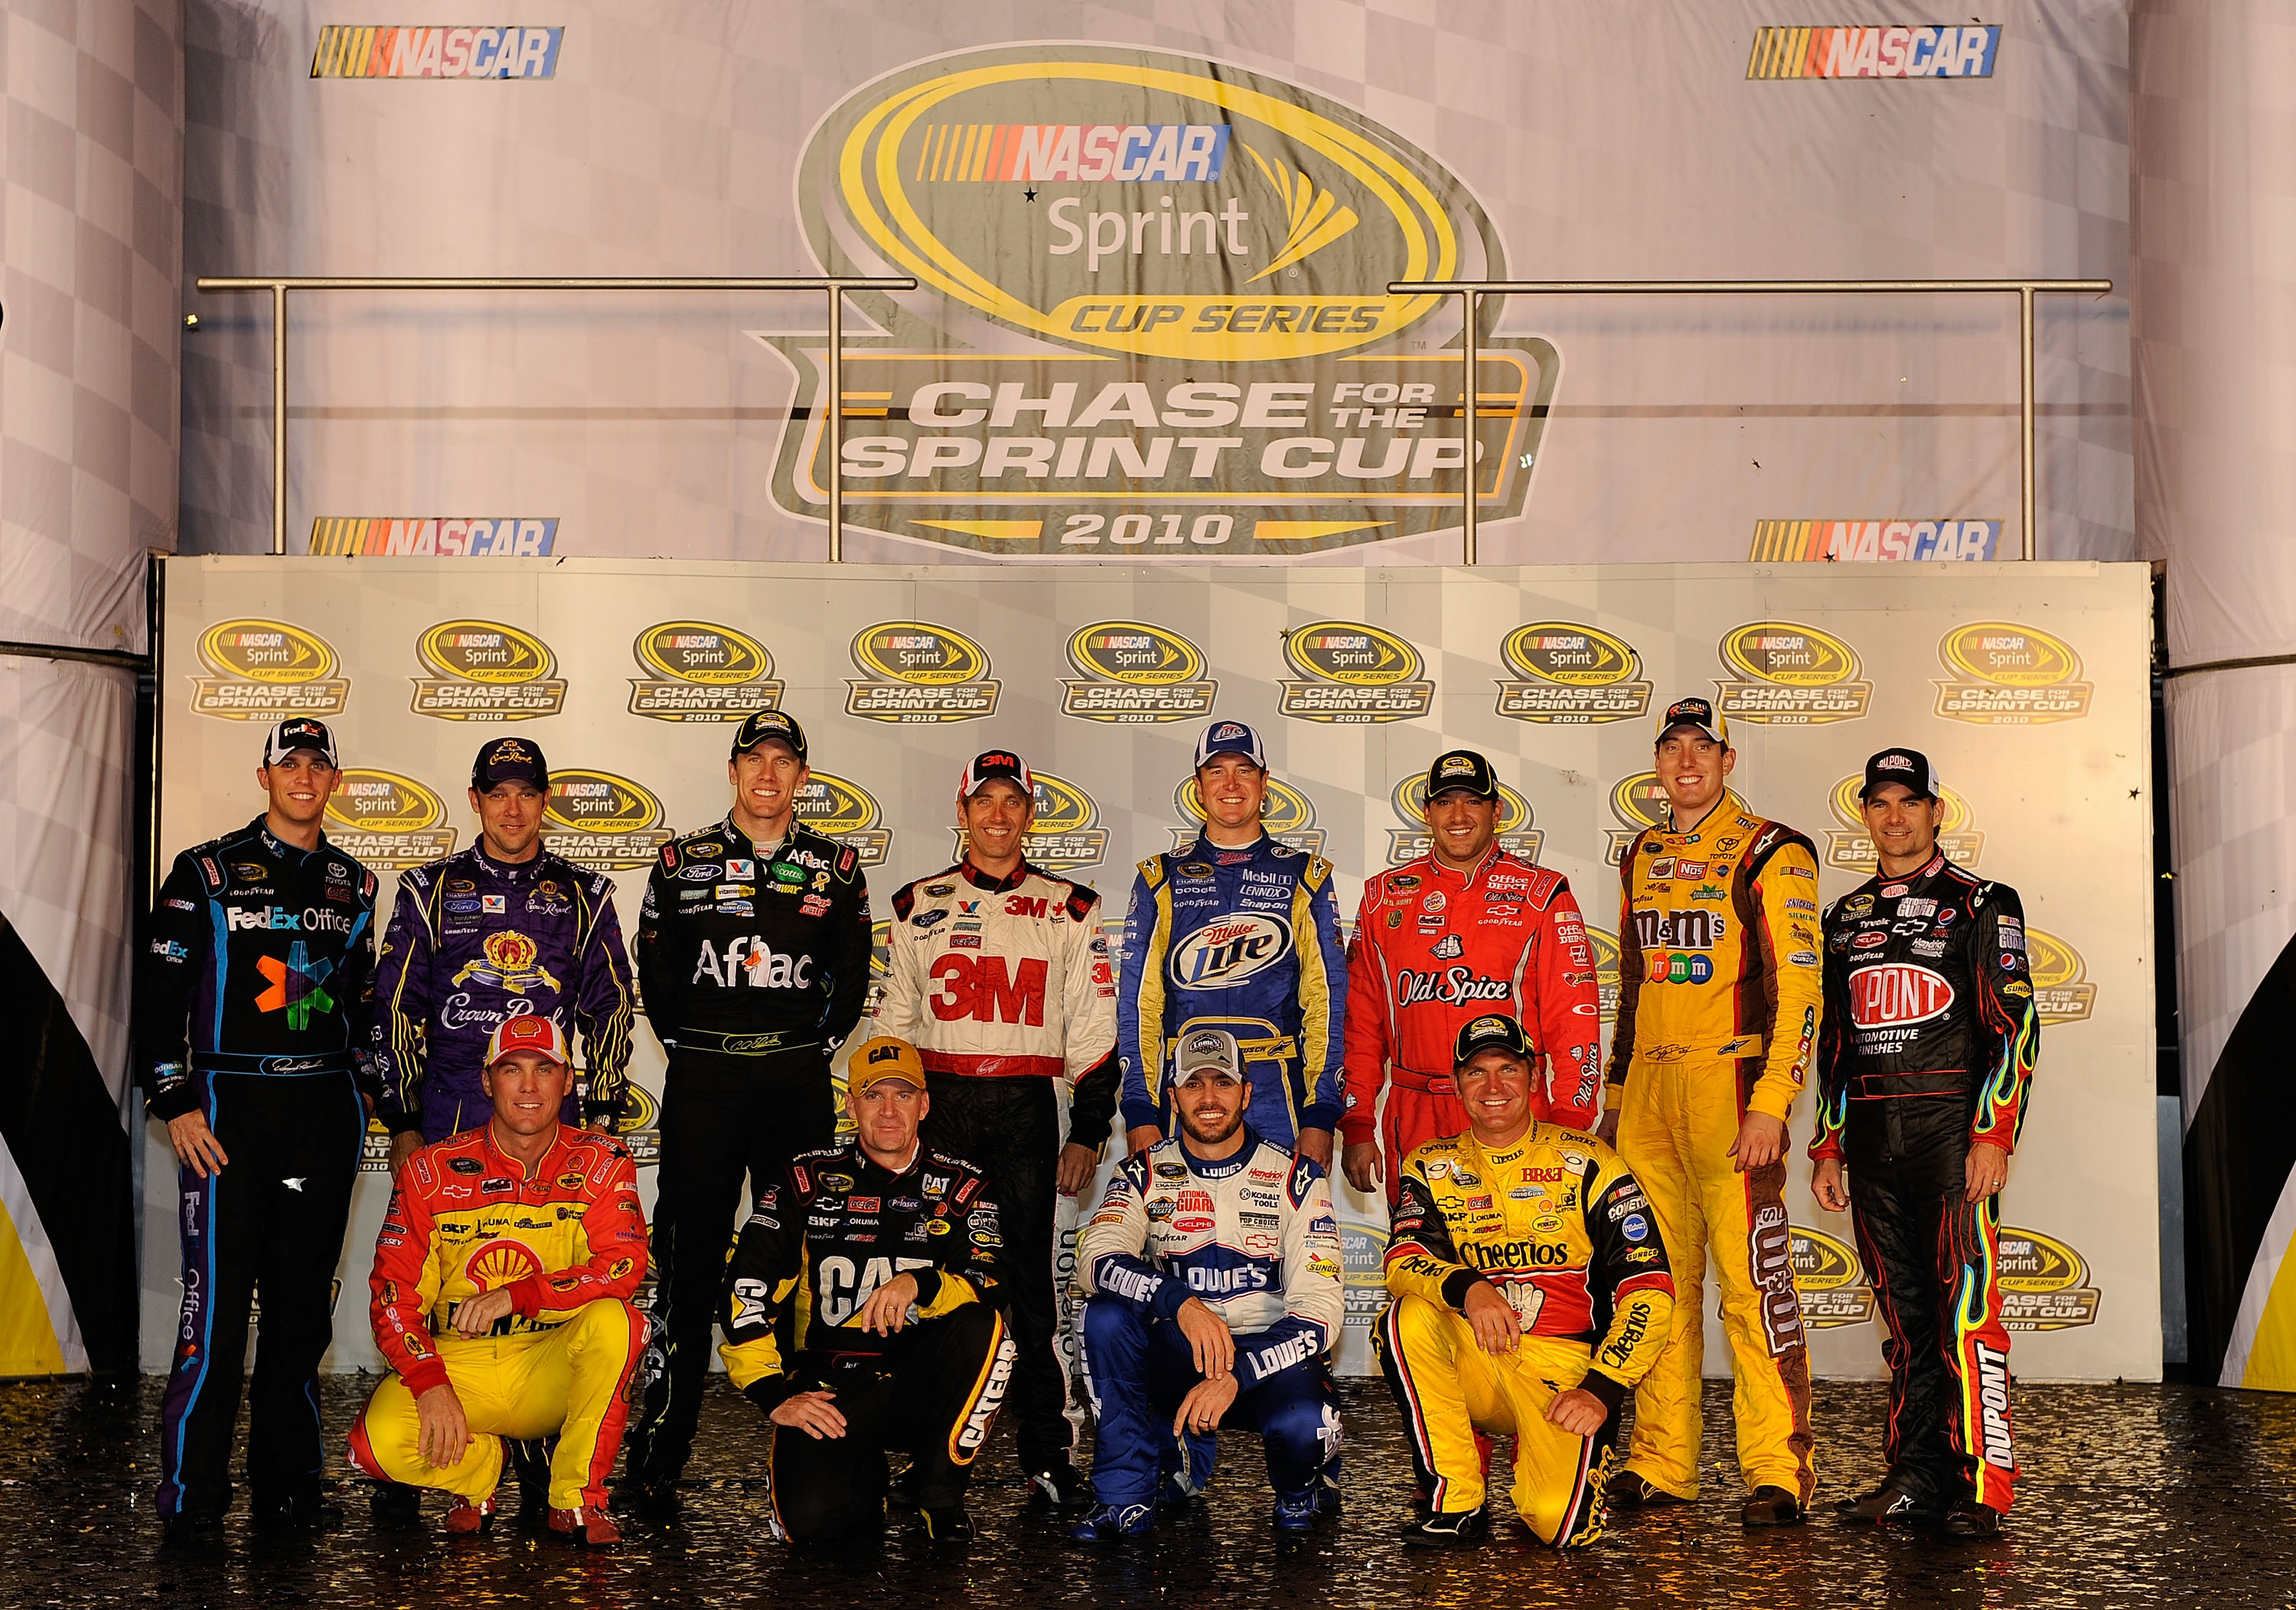 RICHMOND, VA - SEPTEMBER 11:  (Back row from L-R) The 2010 NASCAR Sprint Cup Series Chase contenders Denny Hamlin, driver of the #11 FedEx Office Toyota, Matt Kenseth, driver of the #17 Crown Royal Ford, Carl Edwards, driver of the #99 Kellogg's/Cheez-It 